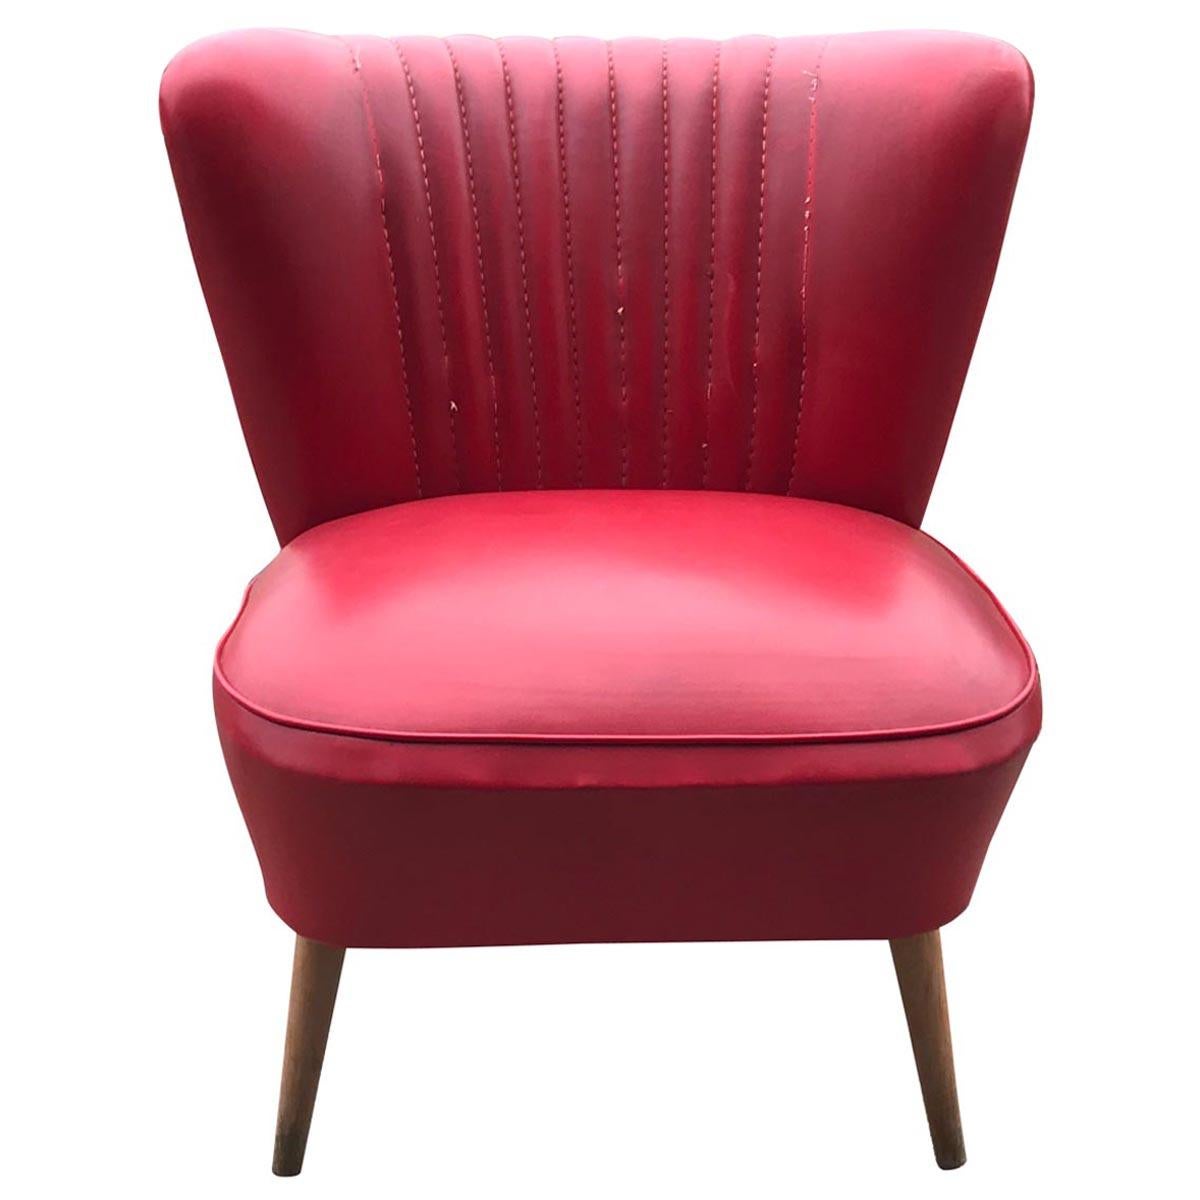 Mid Century 1950s-1960s Original Red Cocktail Chair Armchair For Sale